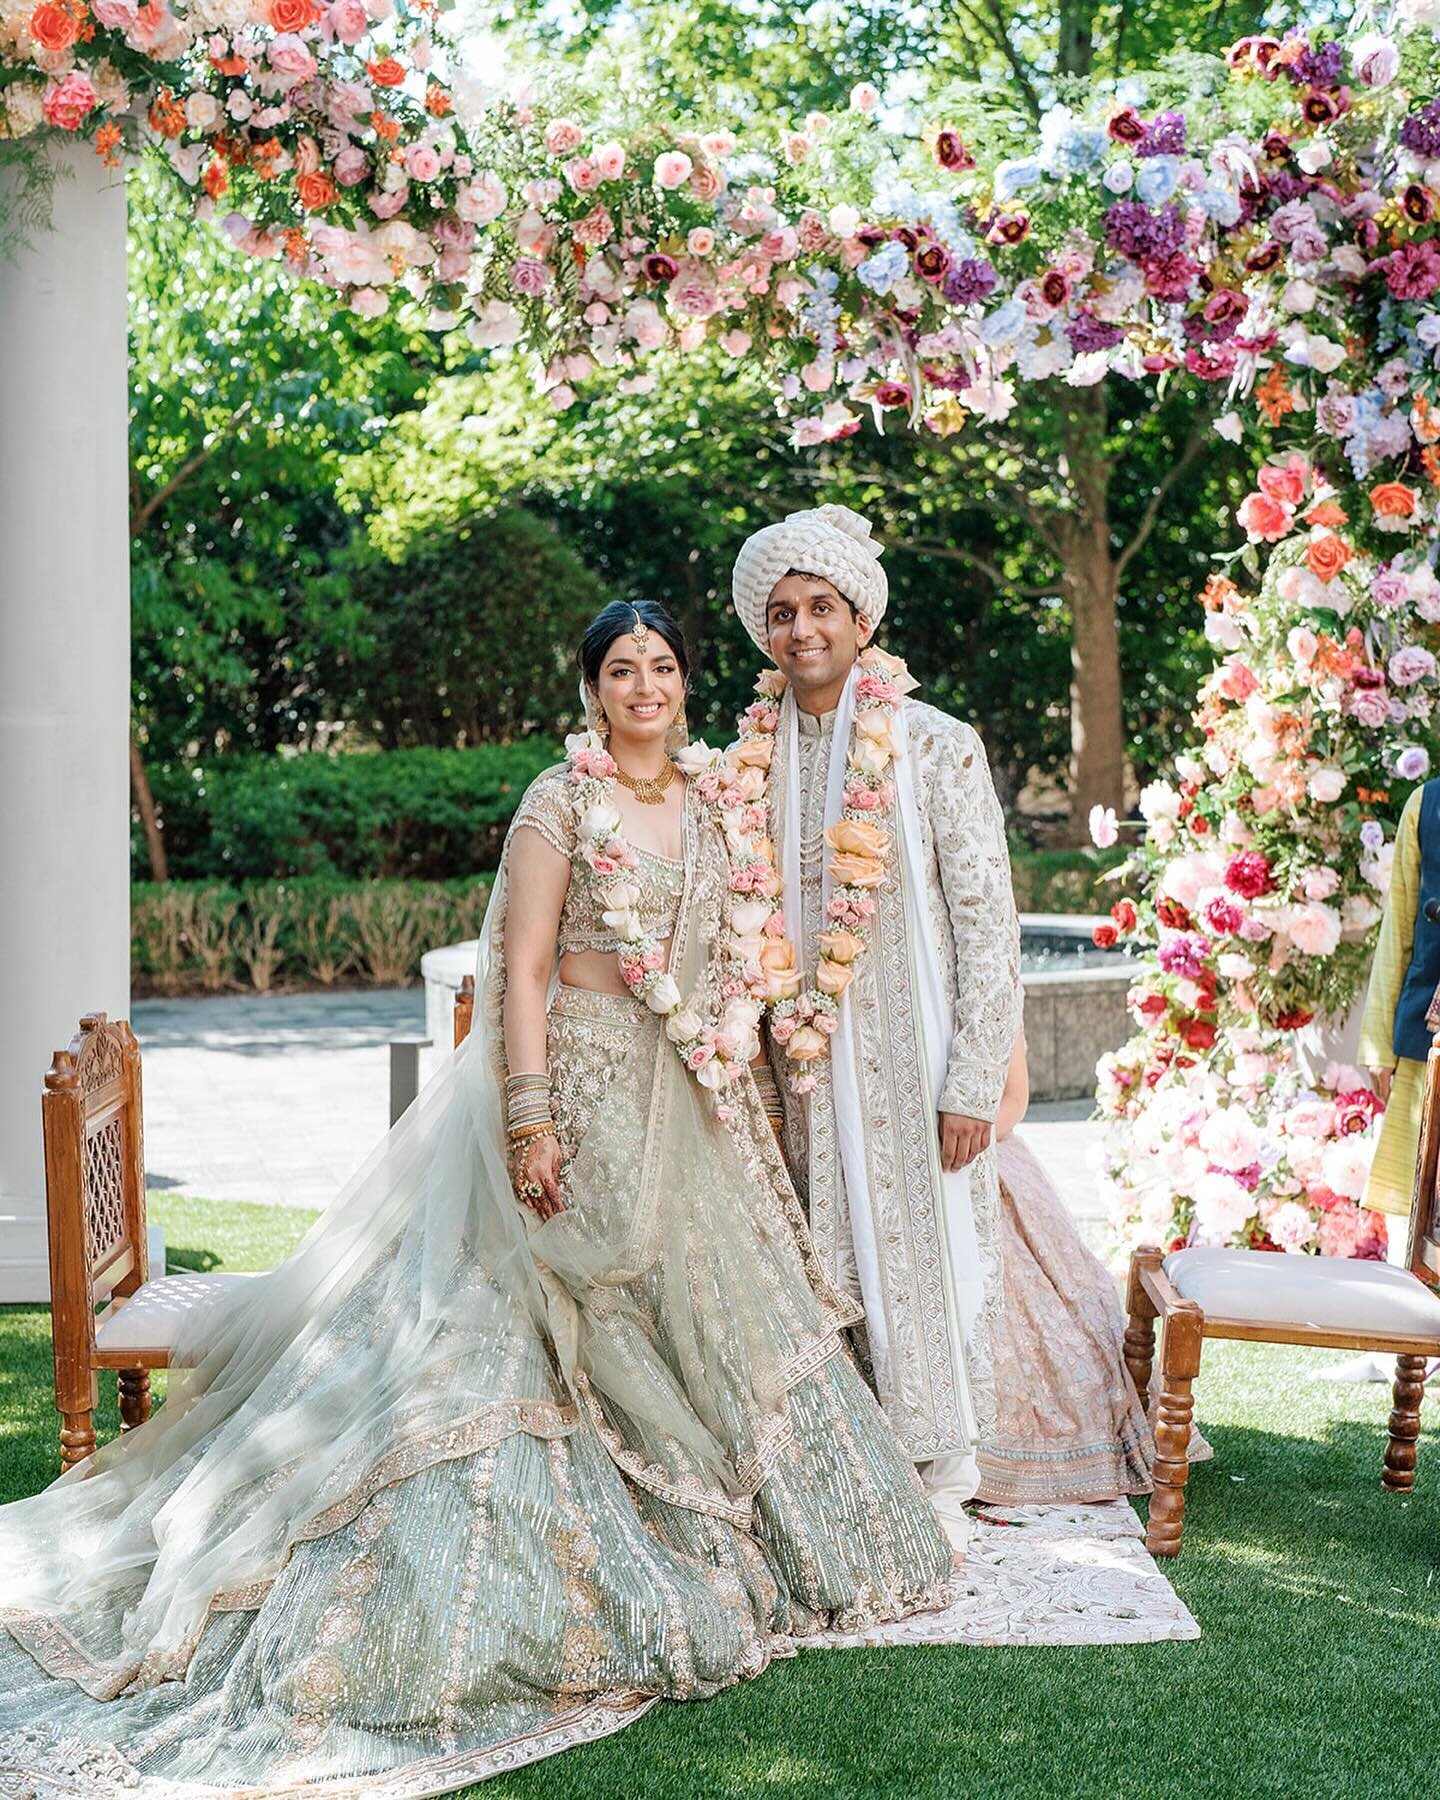 It was truly such a pleasure making the florals for this beautiful couple @anupandit &amp; Shivam. Inspite of all the challenges, the final products were beautiful.
Planner - @desaidesigns 
Decor- @myardecor 
Photography- @rachel.jpeg_ 
Videography- 